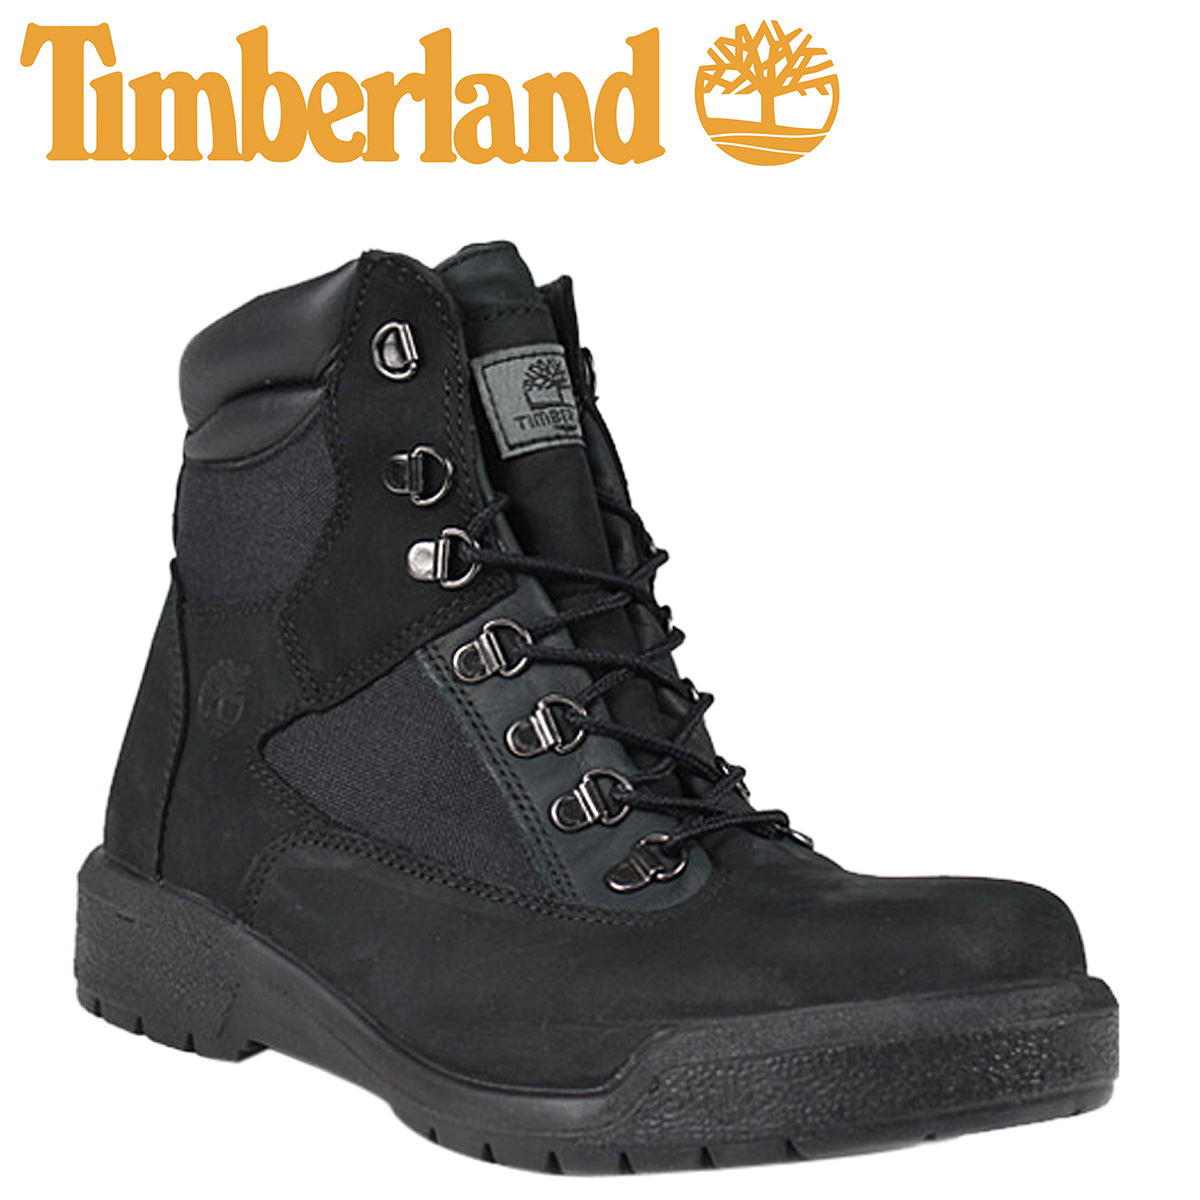 6 inch field timberland boots